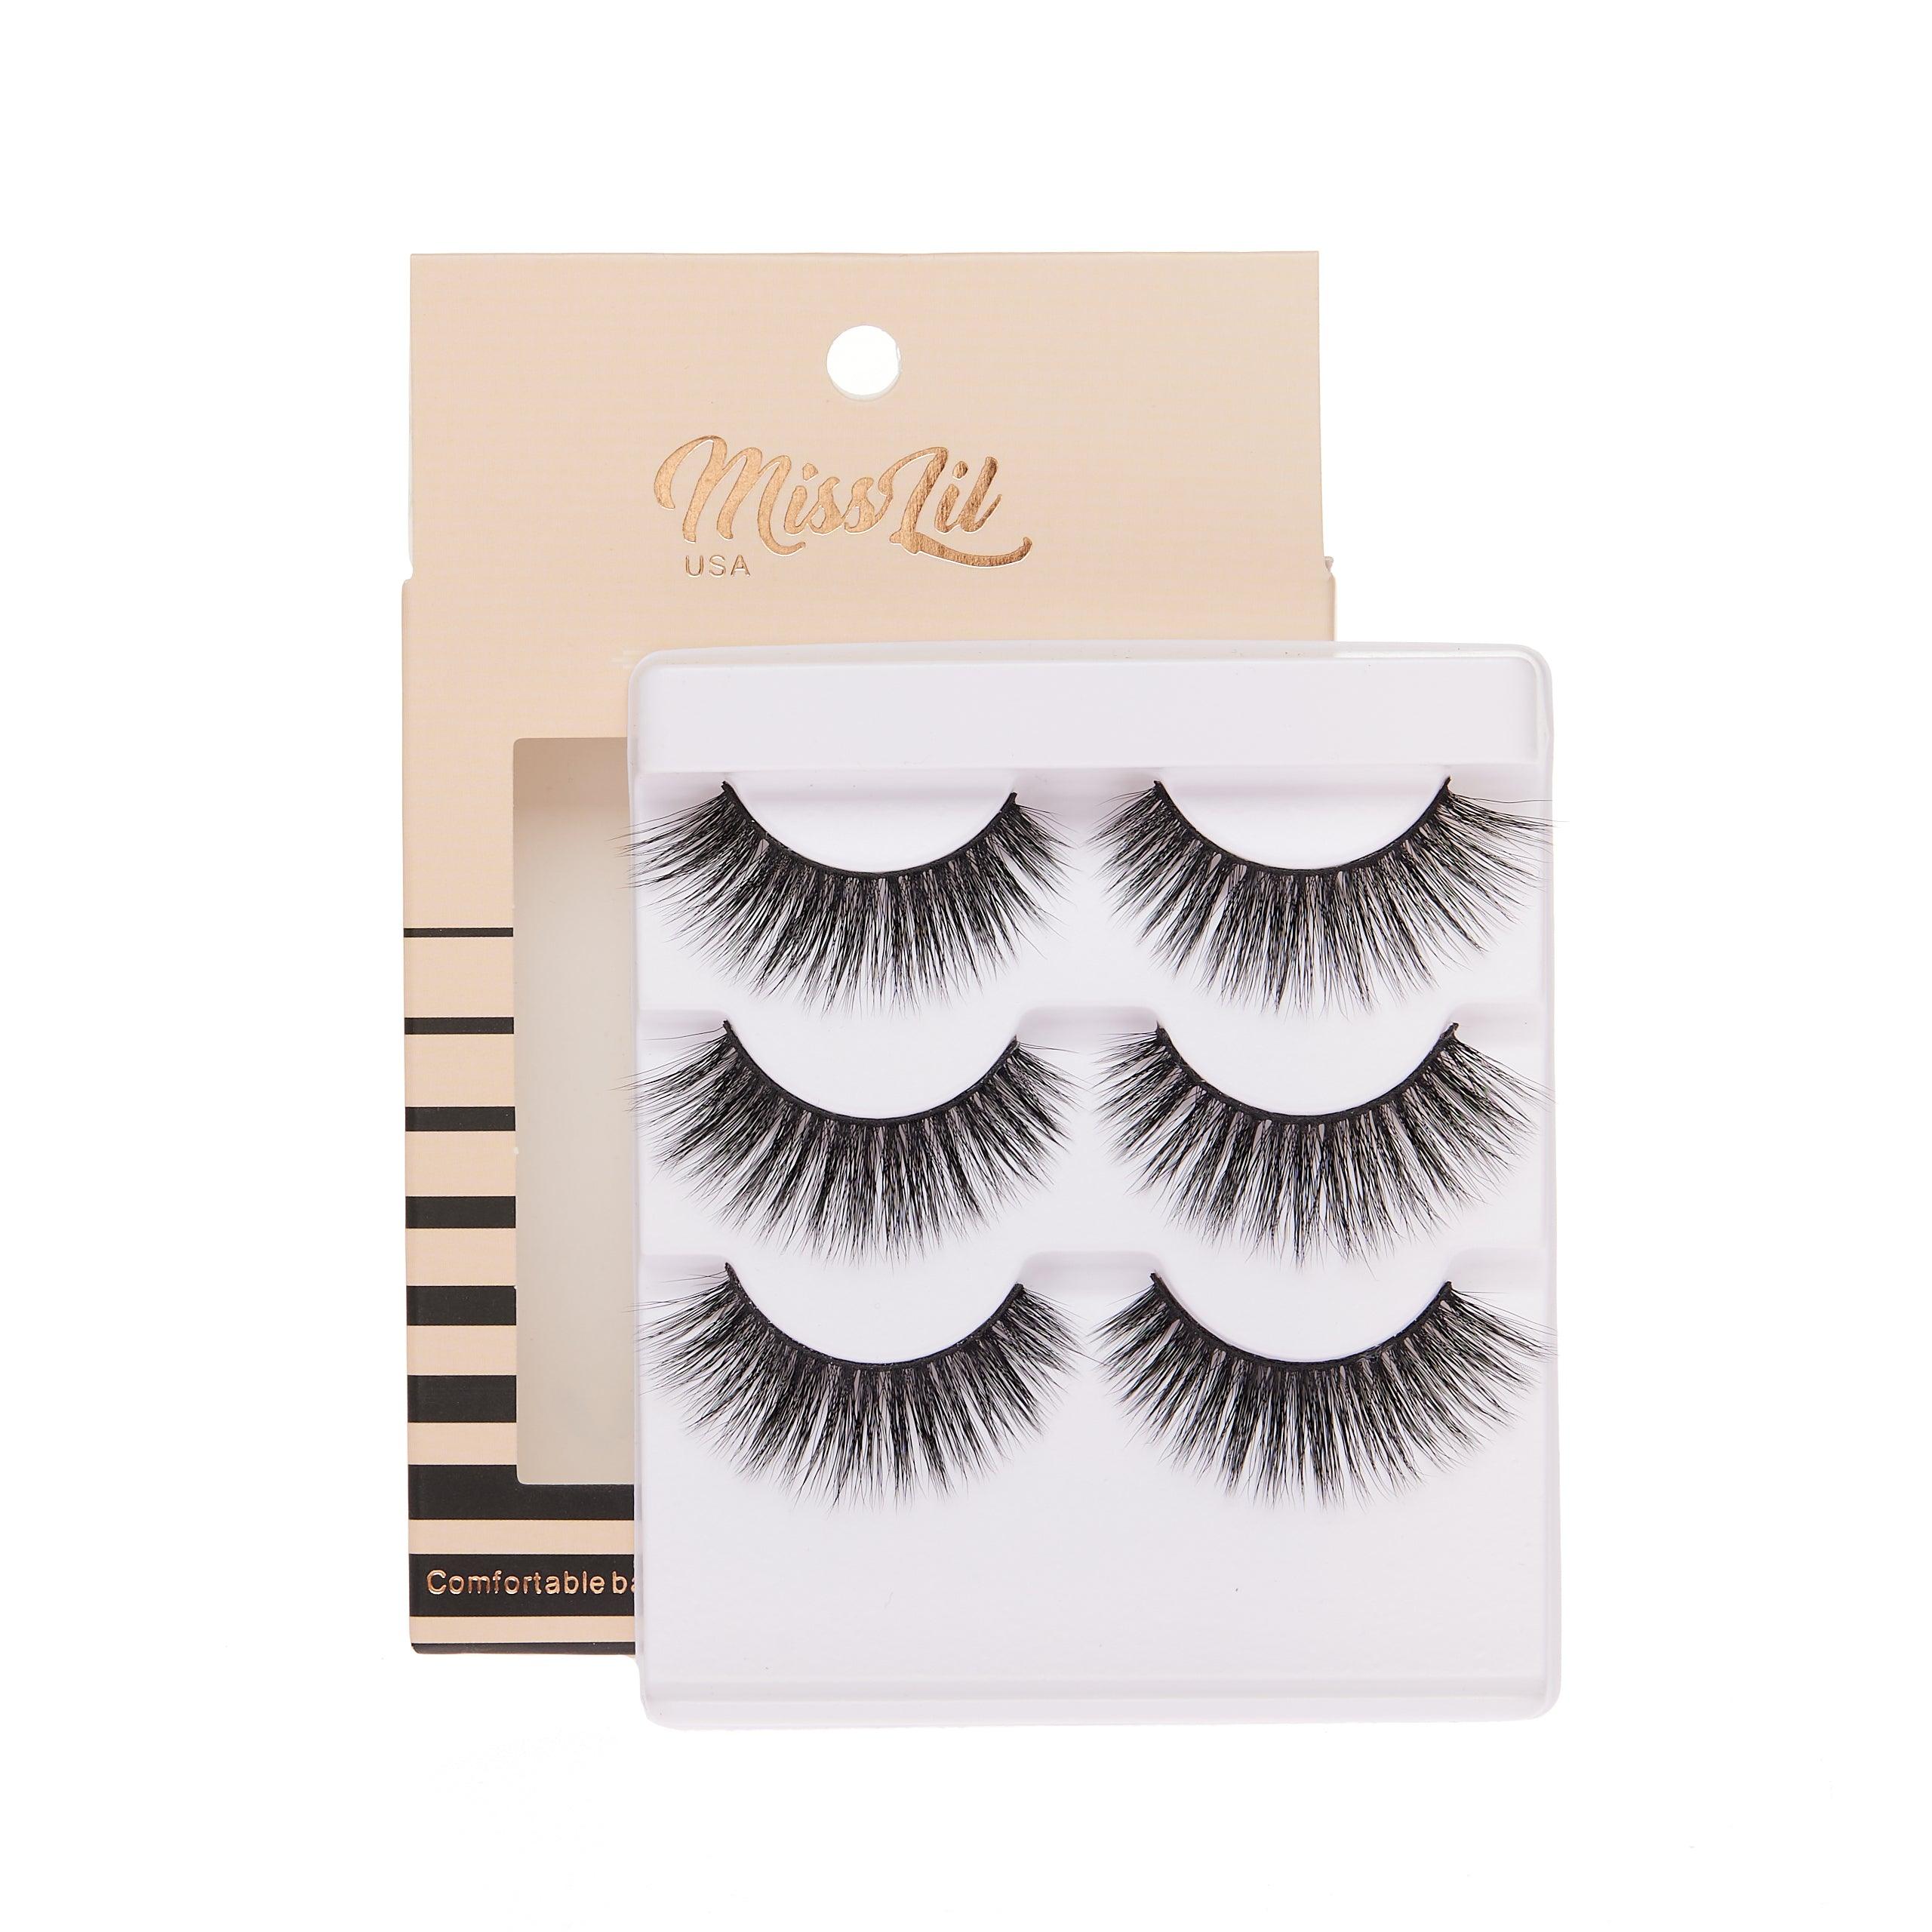 3-Pair Faux 9D Mink Eyelashes - Luxury Collection #21 - Pack of 3 - Miss Lil USA